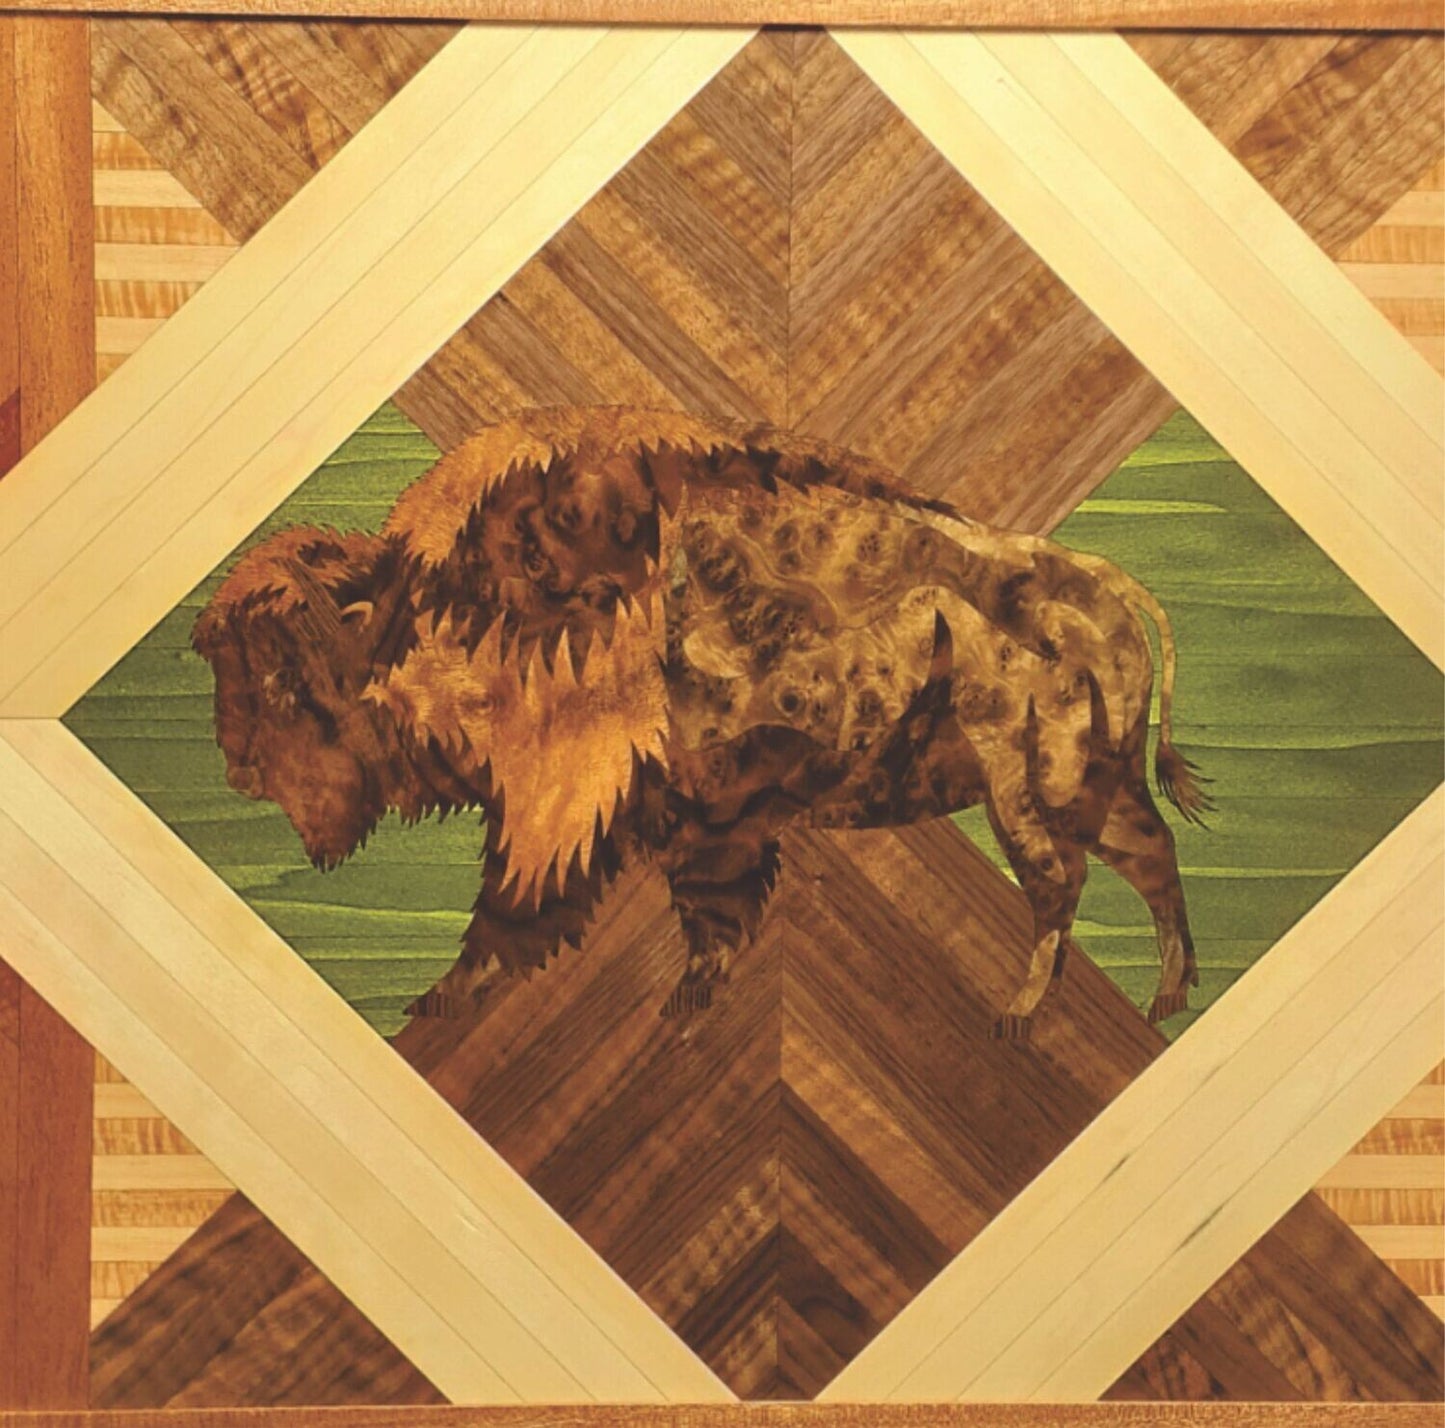 Handcrafted Wall Decor - "Buffalo Spirit" Made in the U.S.